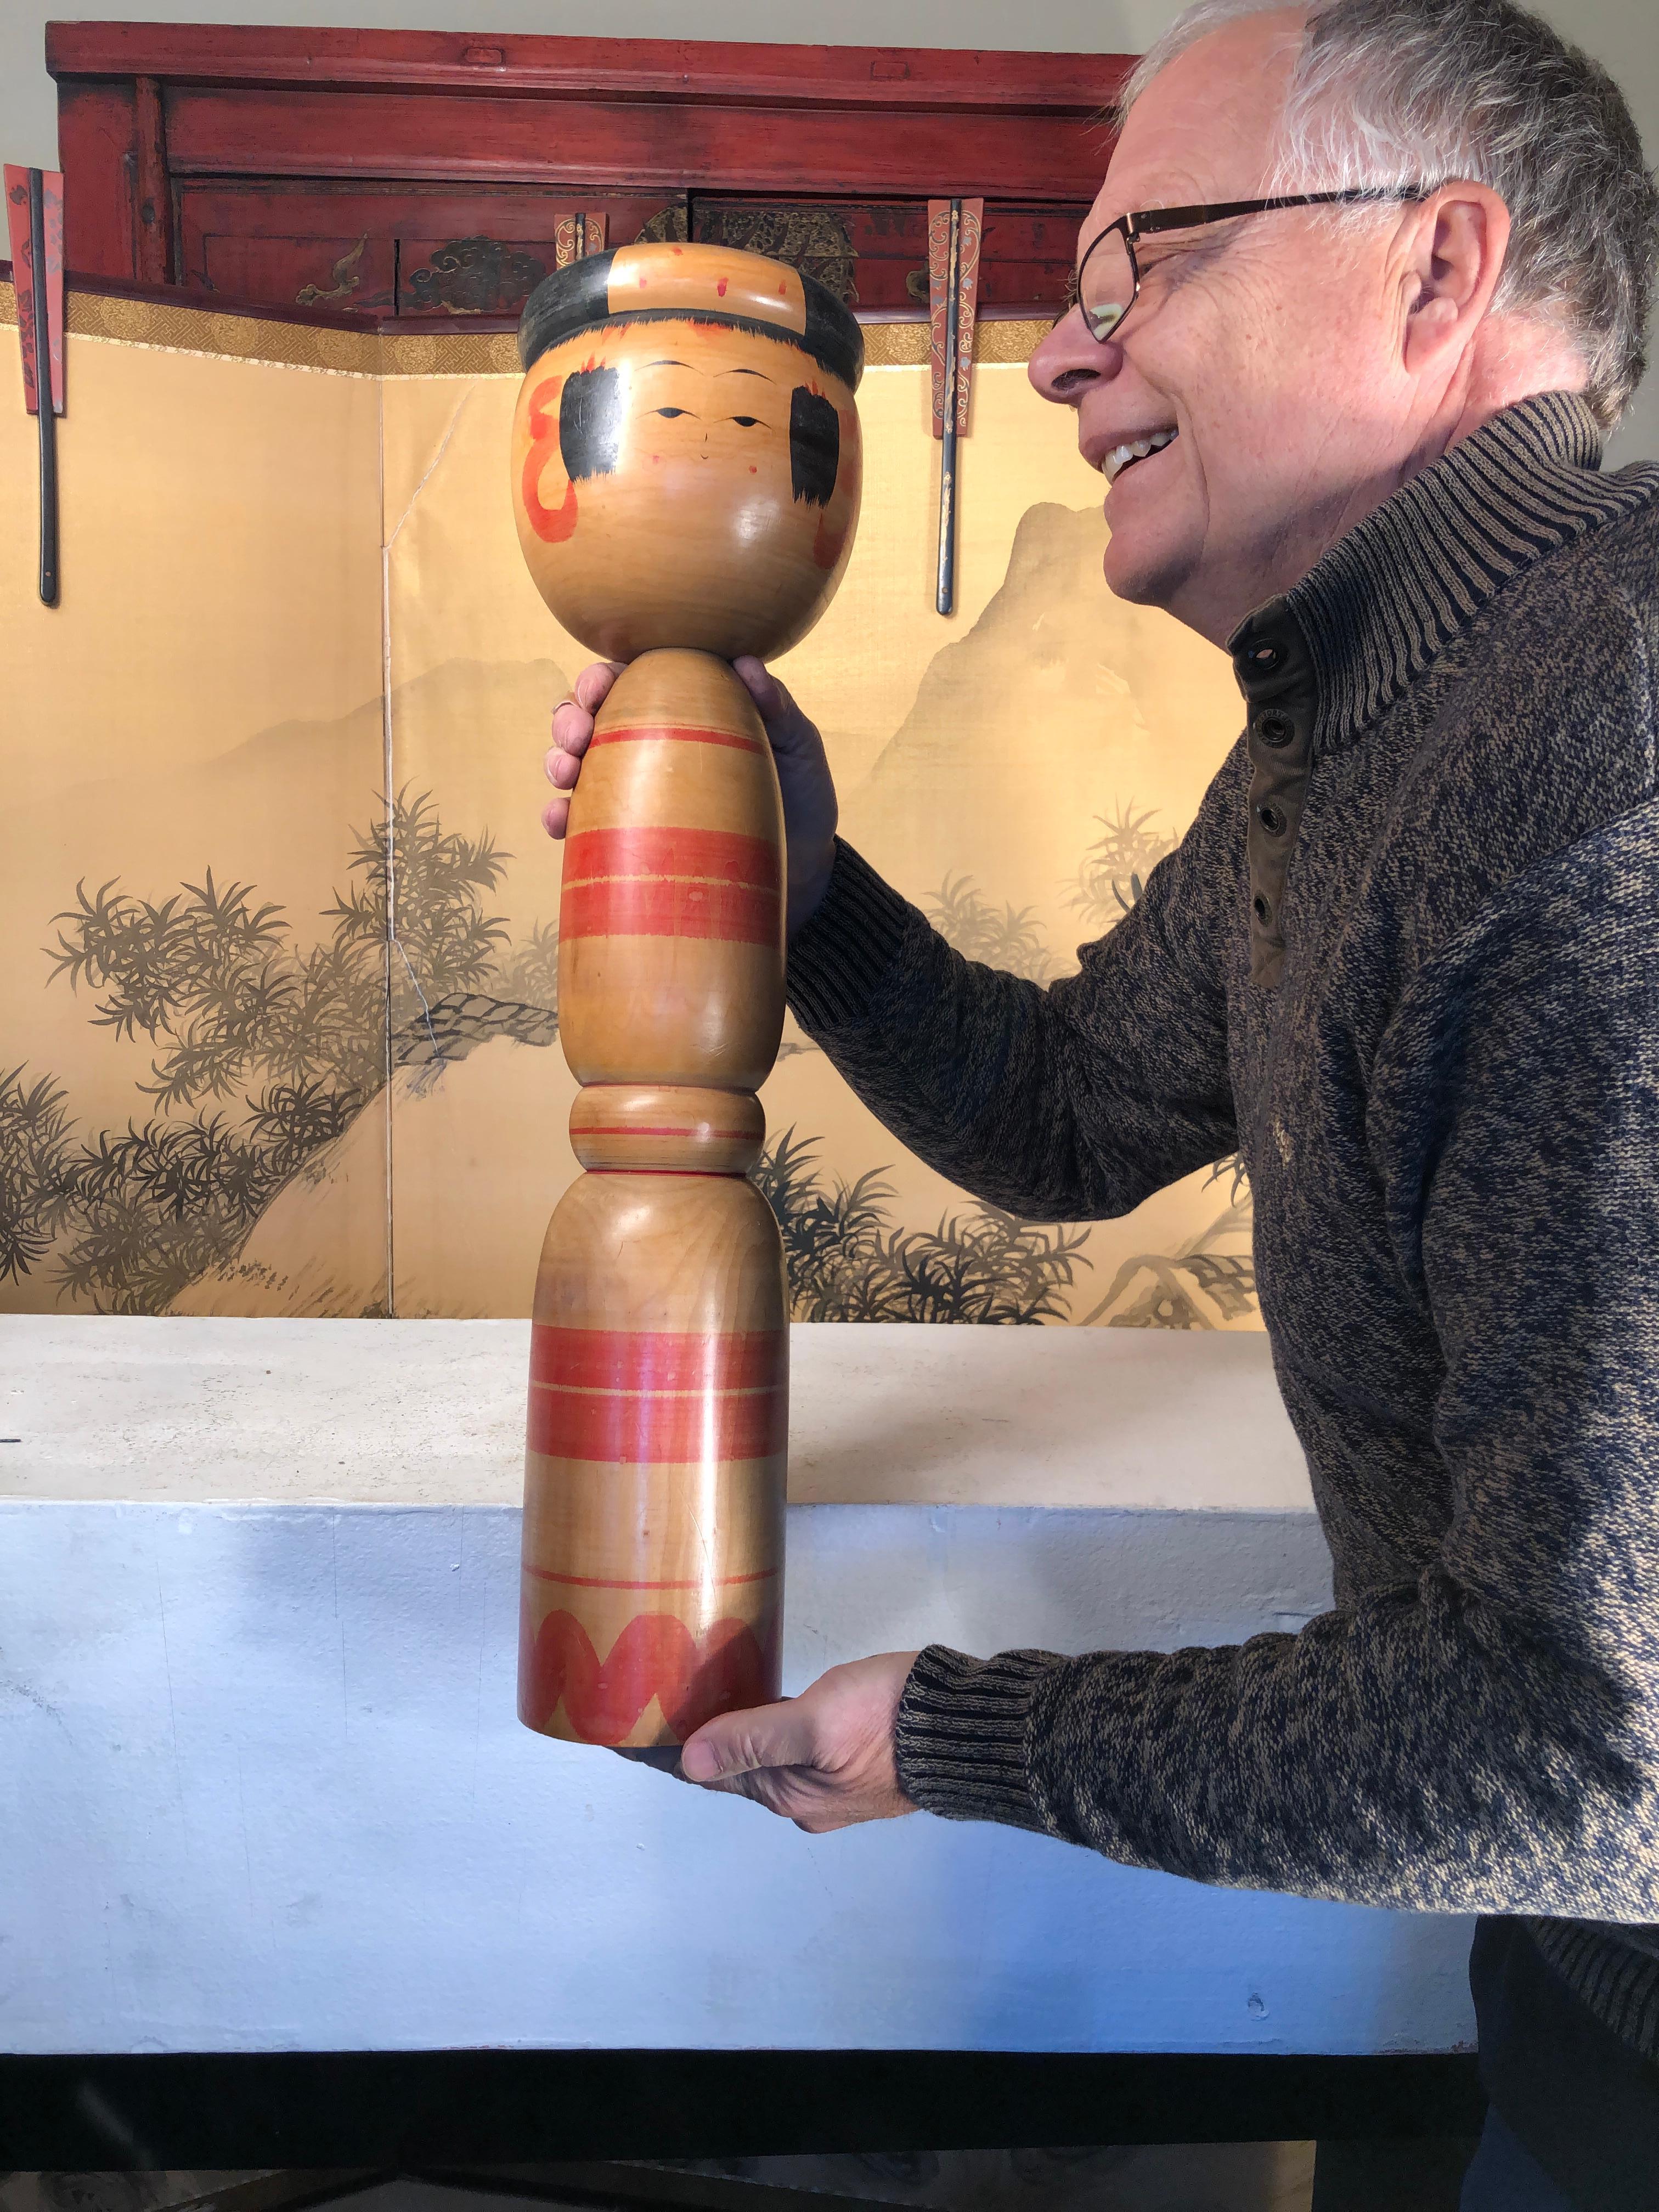 Japan, an extraordinary example of a substantial 26 inch high one of a kind handcrafted and hand painted wooden Kokeshi doll, circa mid-20th century.

One of a kind collectible that rarely come onto the market in this massive size. Signed on